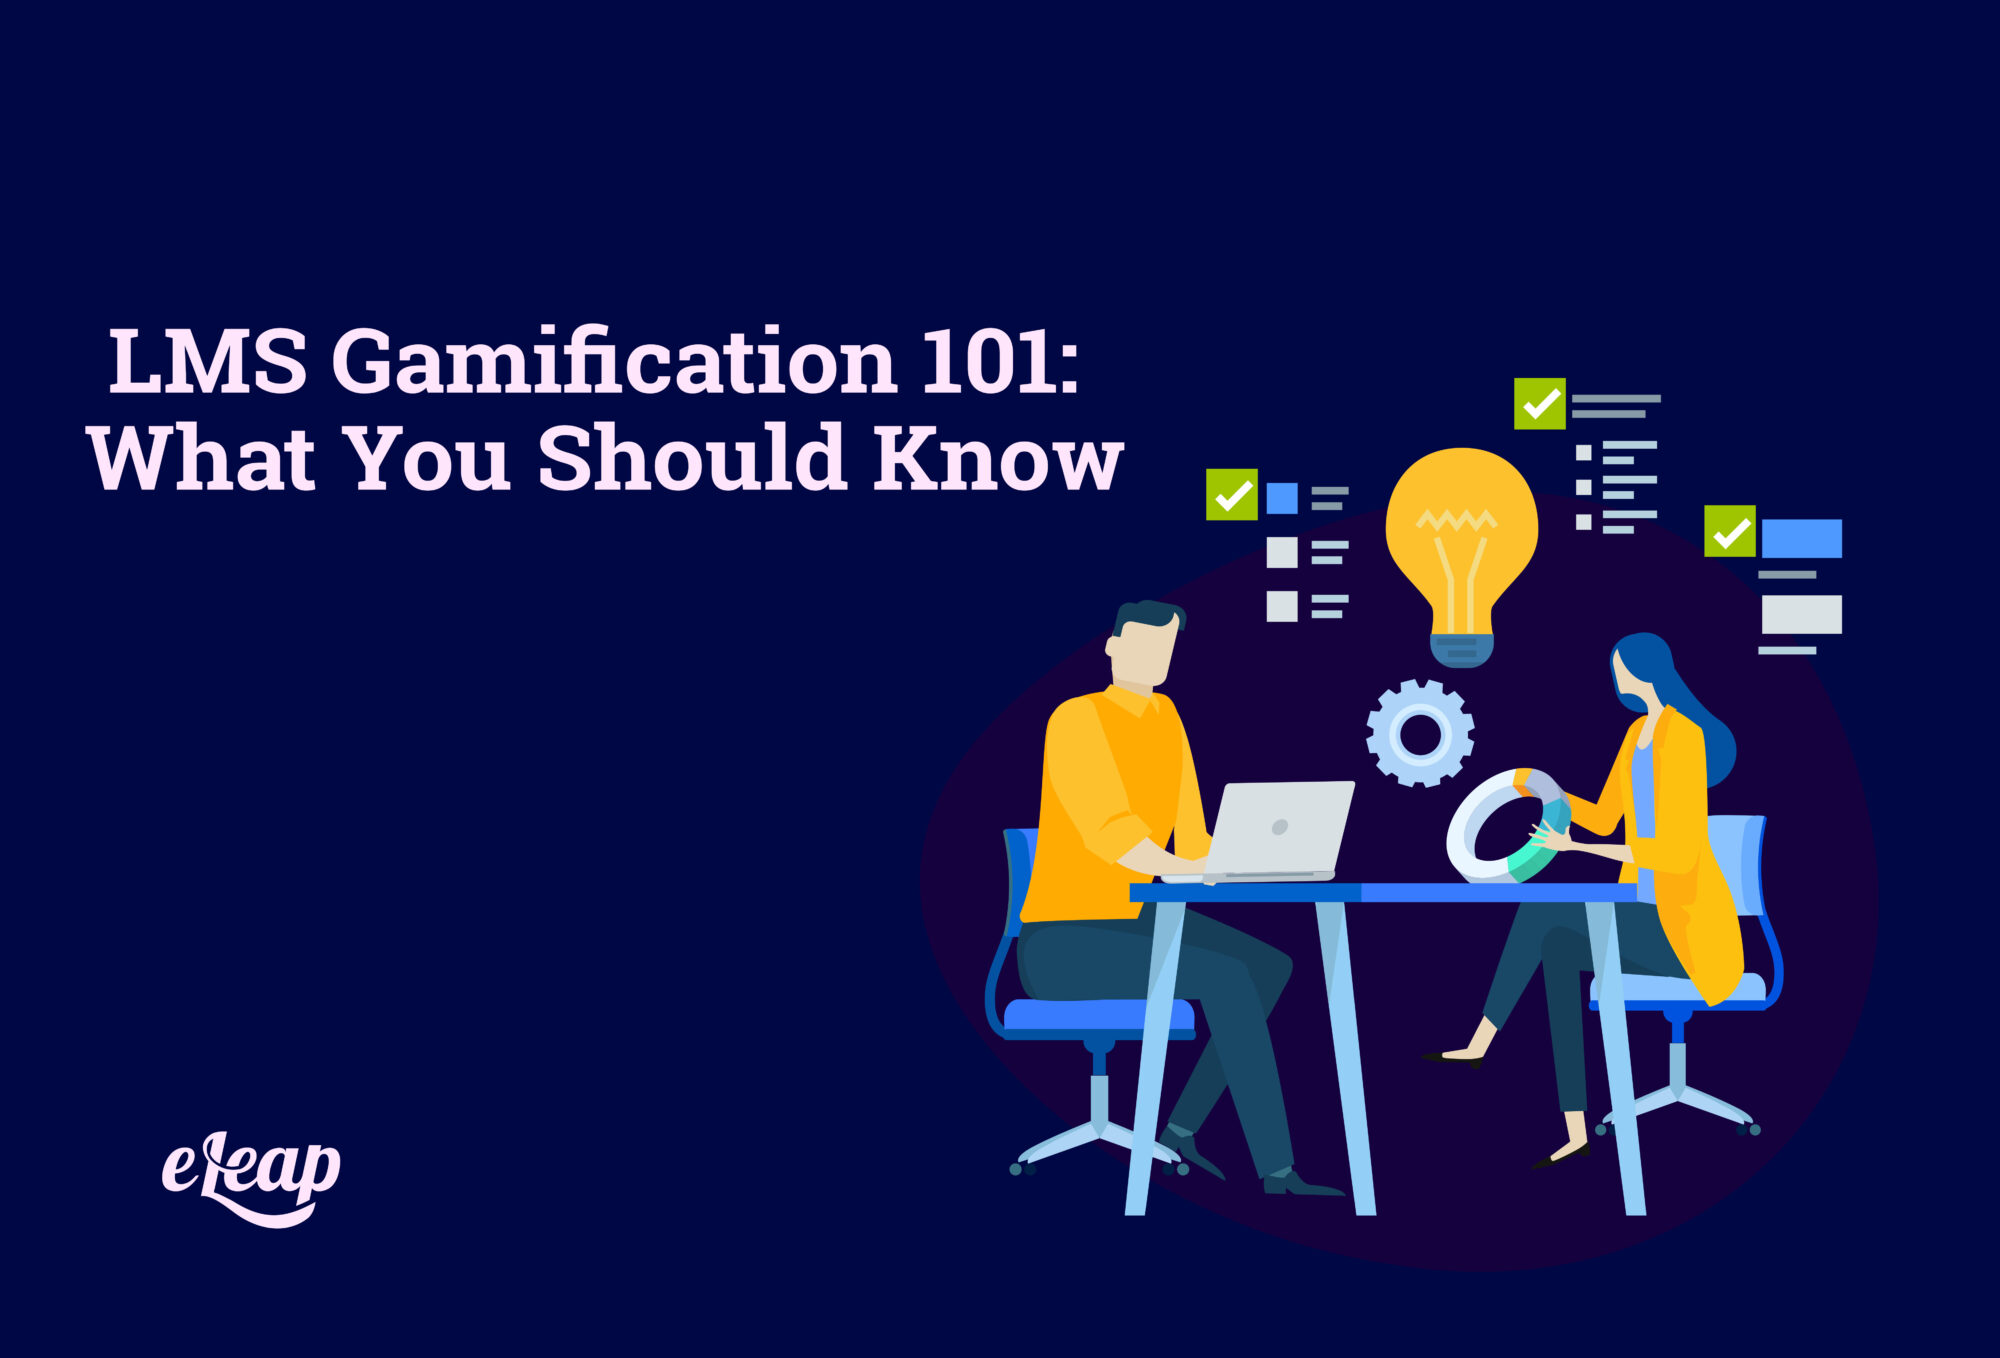 LMS Gamification 101: What You Should Know